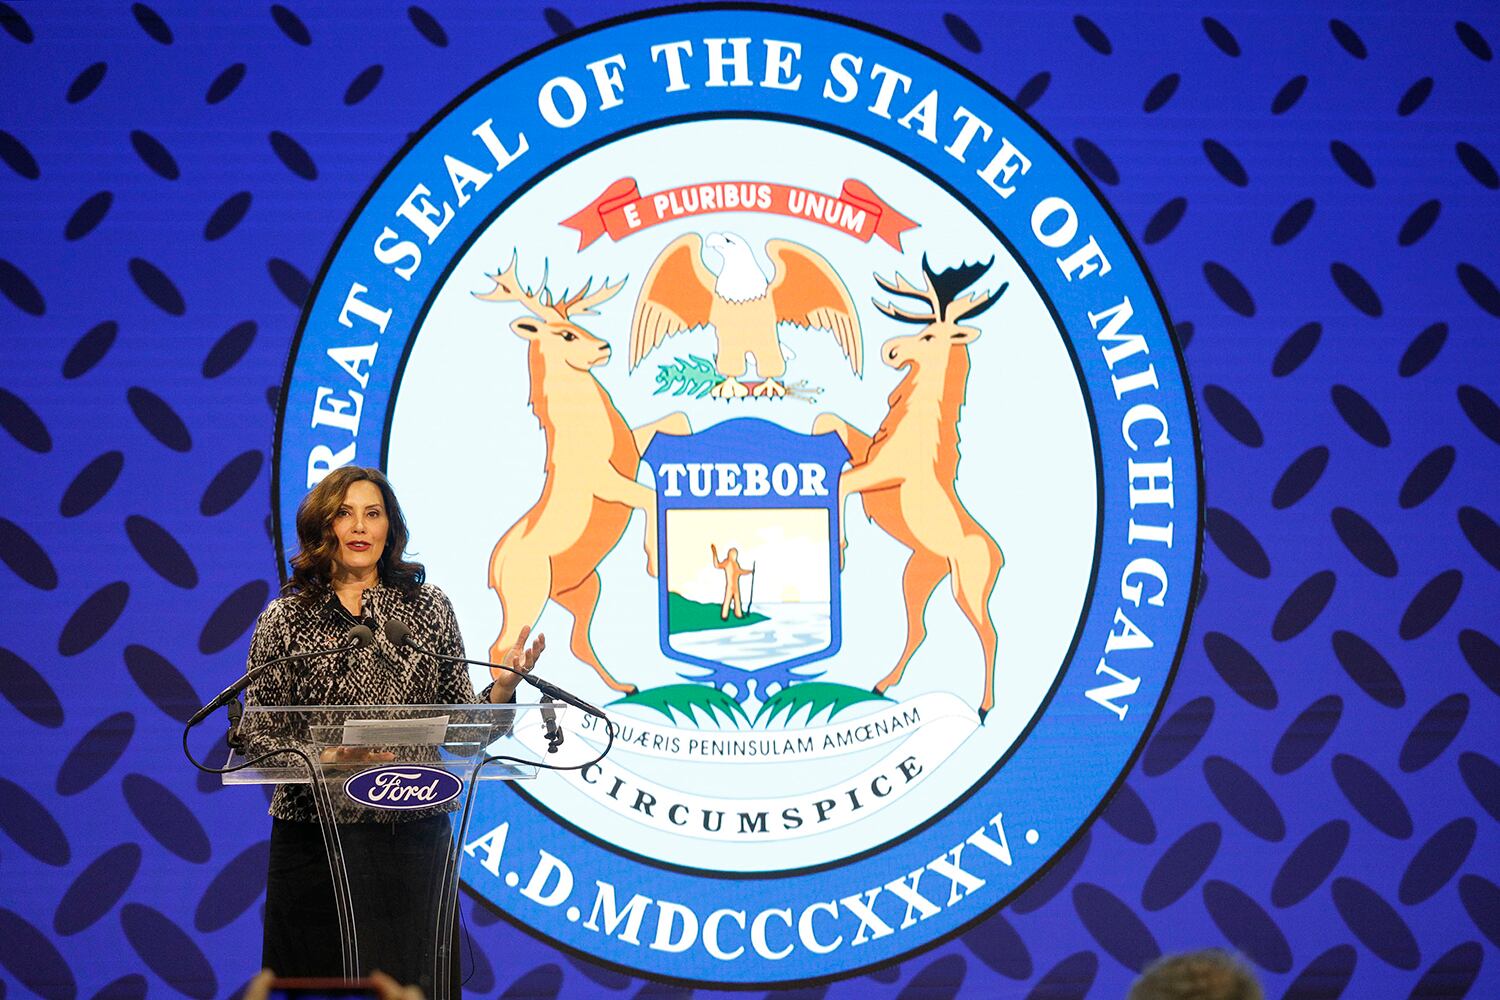 A woman wearing a dark top and a black skirt stands at a podium in front of a large Michigan state seal.